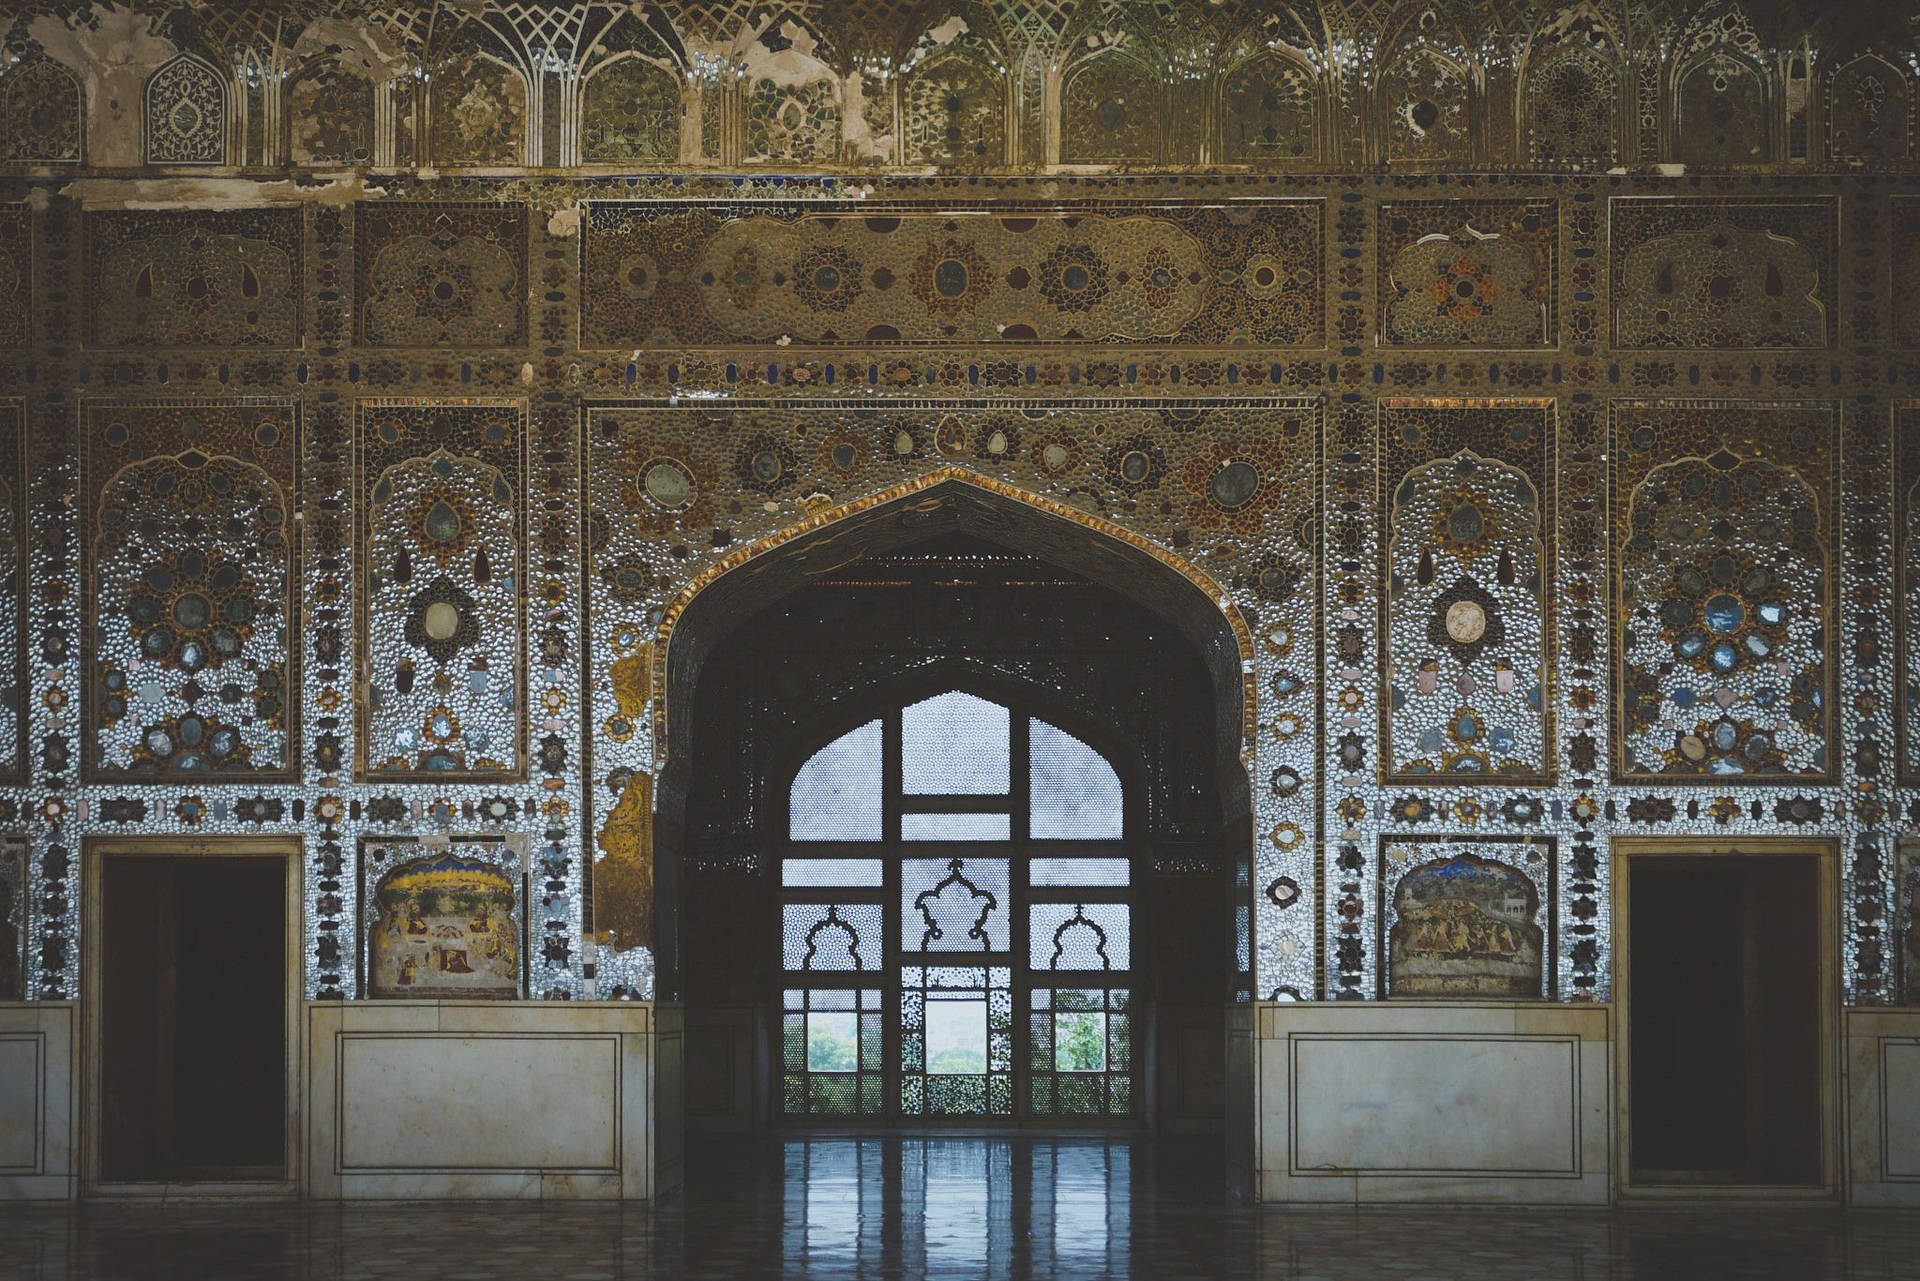 "Stunning Reflections at Lahore Fort's Palace of Mirrors" Wallpaper